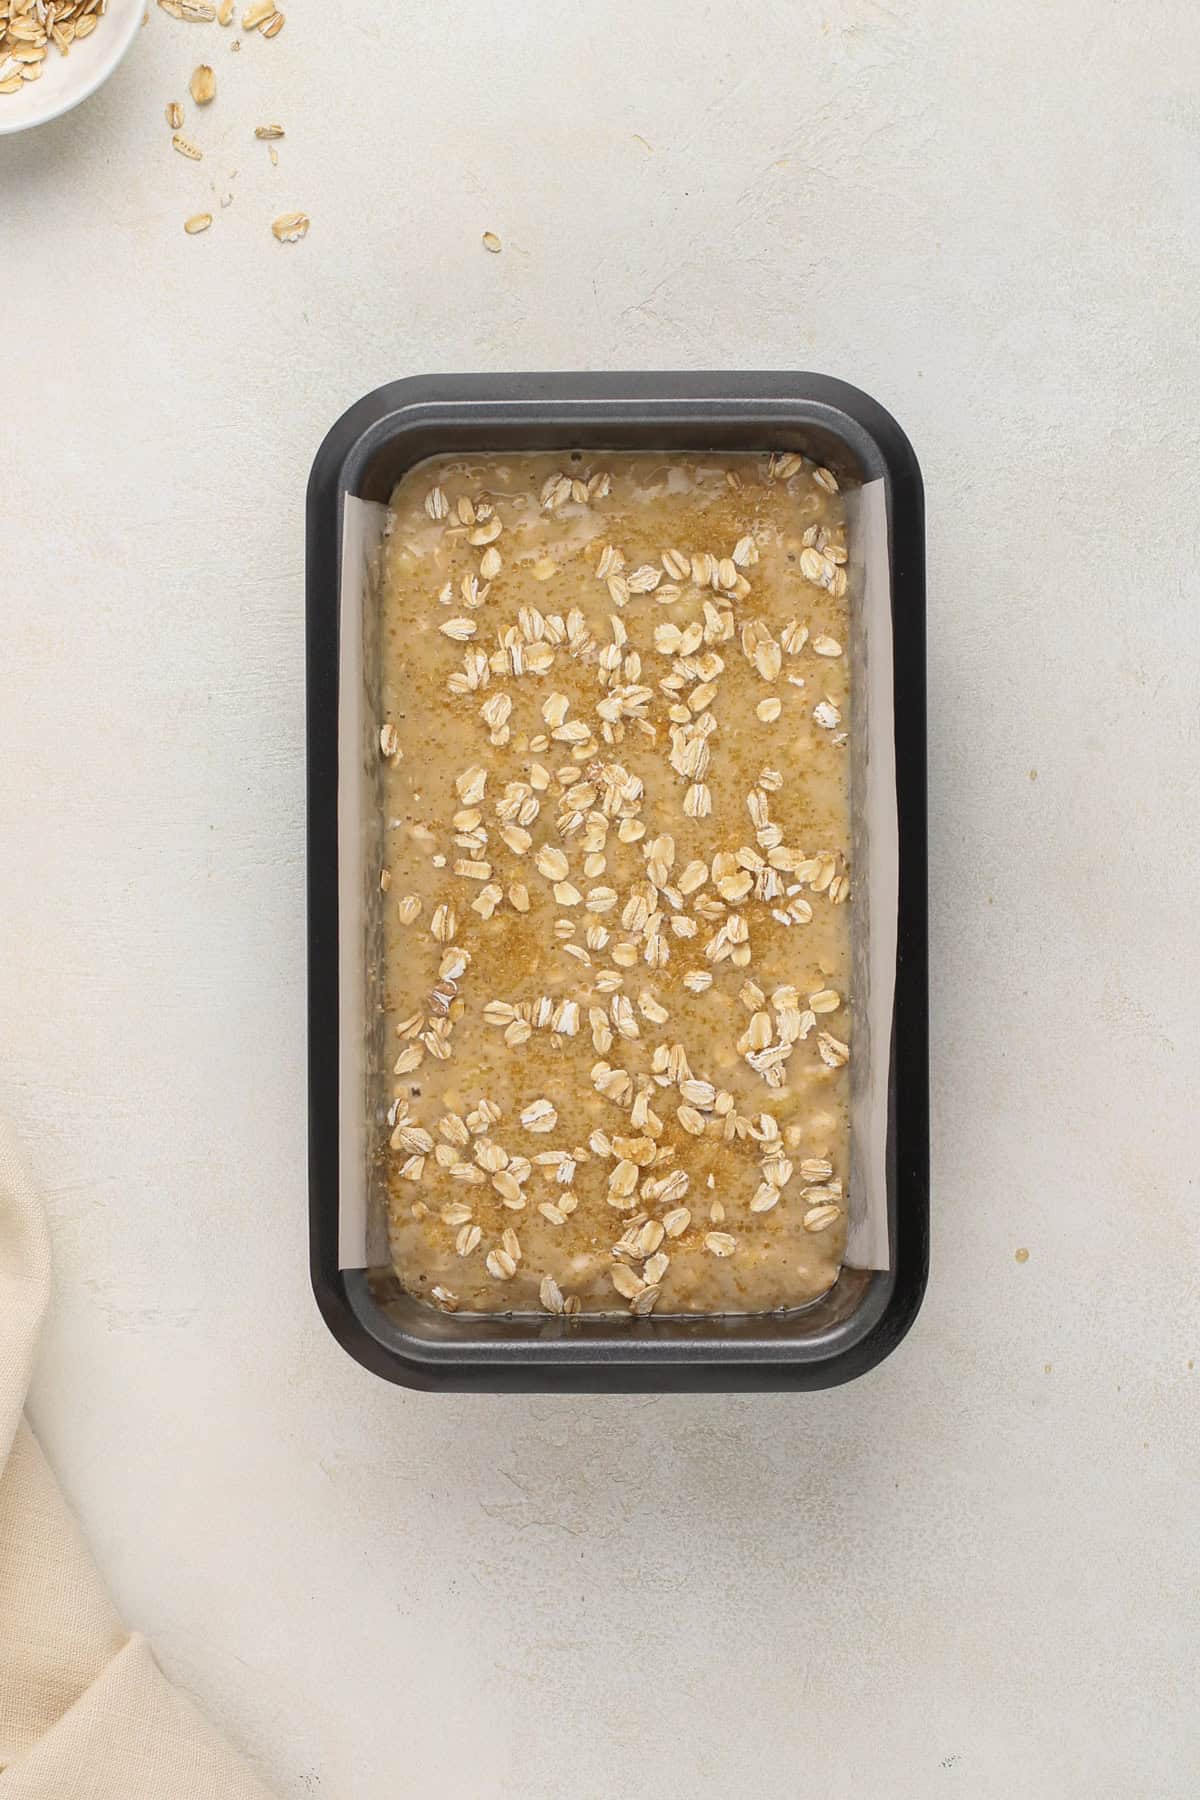 Oatmeal banana bread batter in a loaf pan, ready to go in the oven.